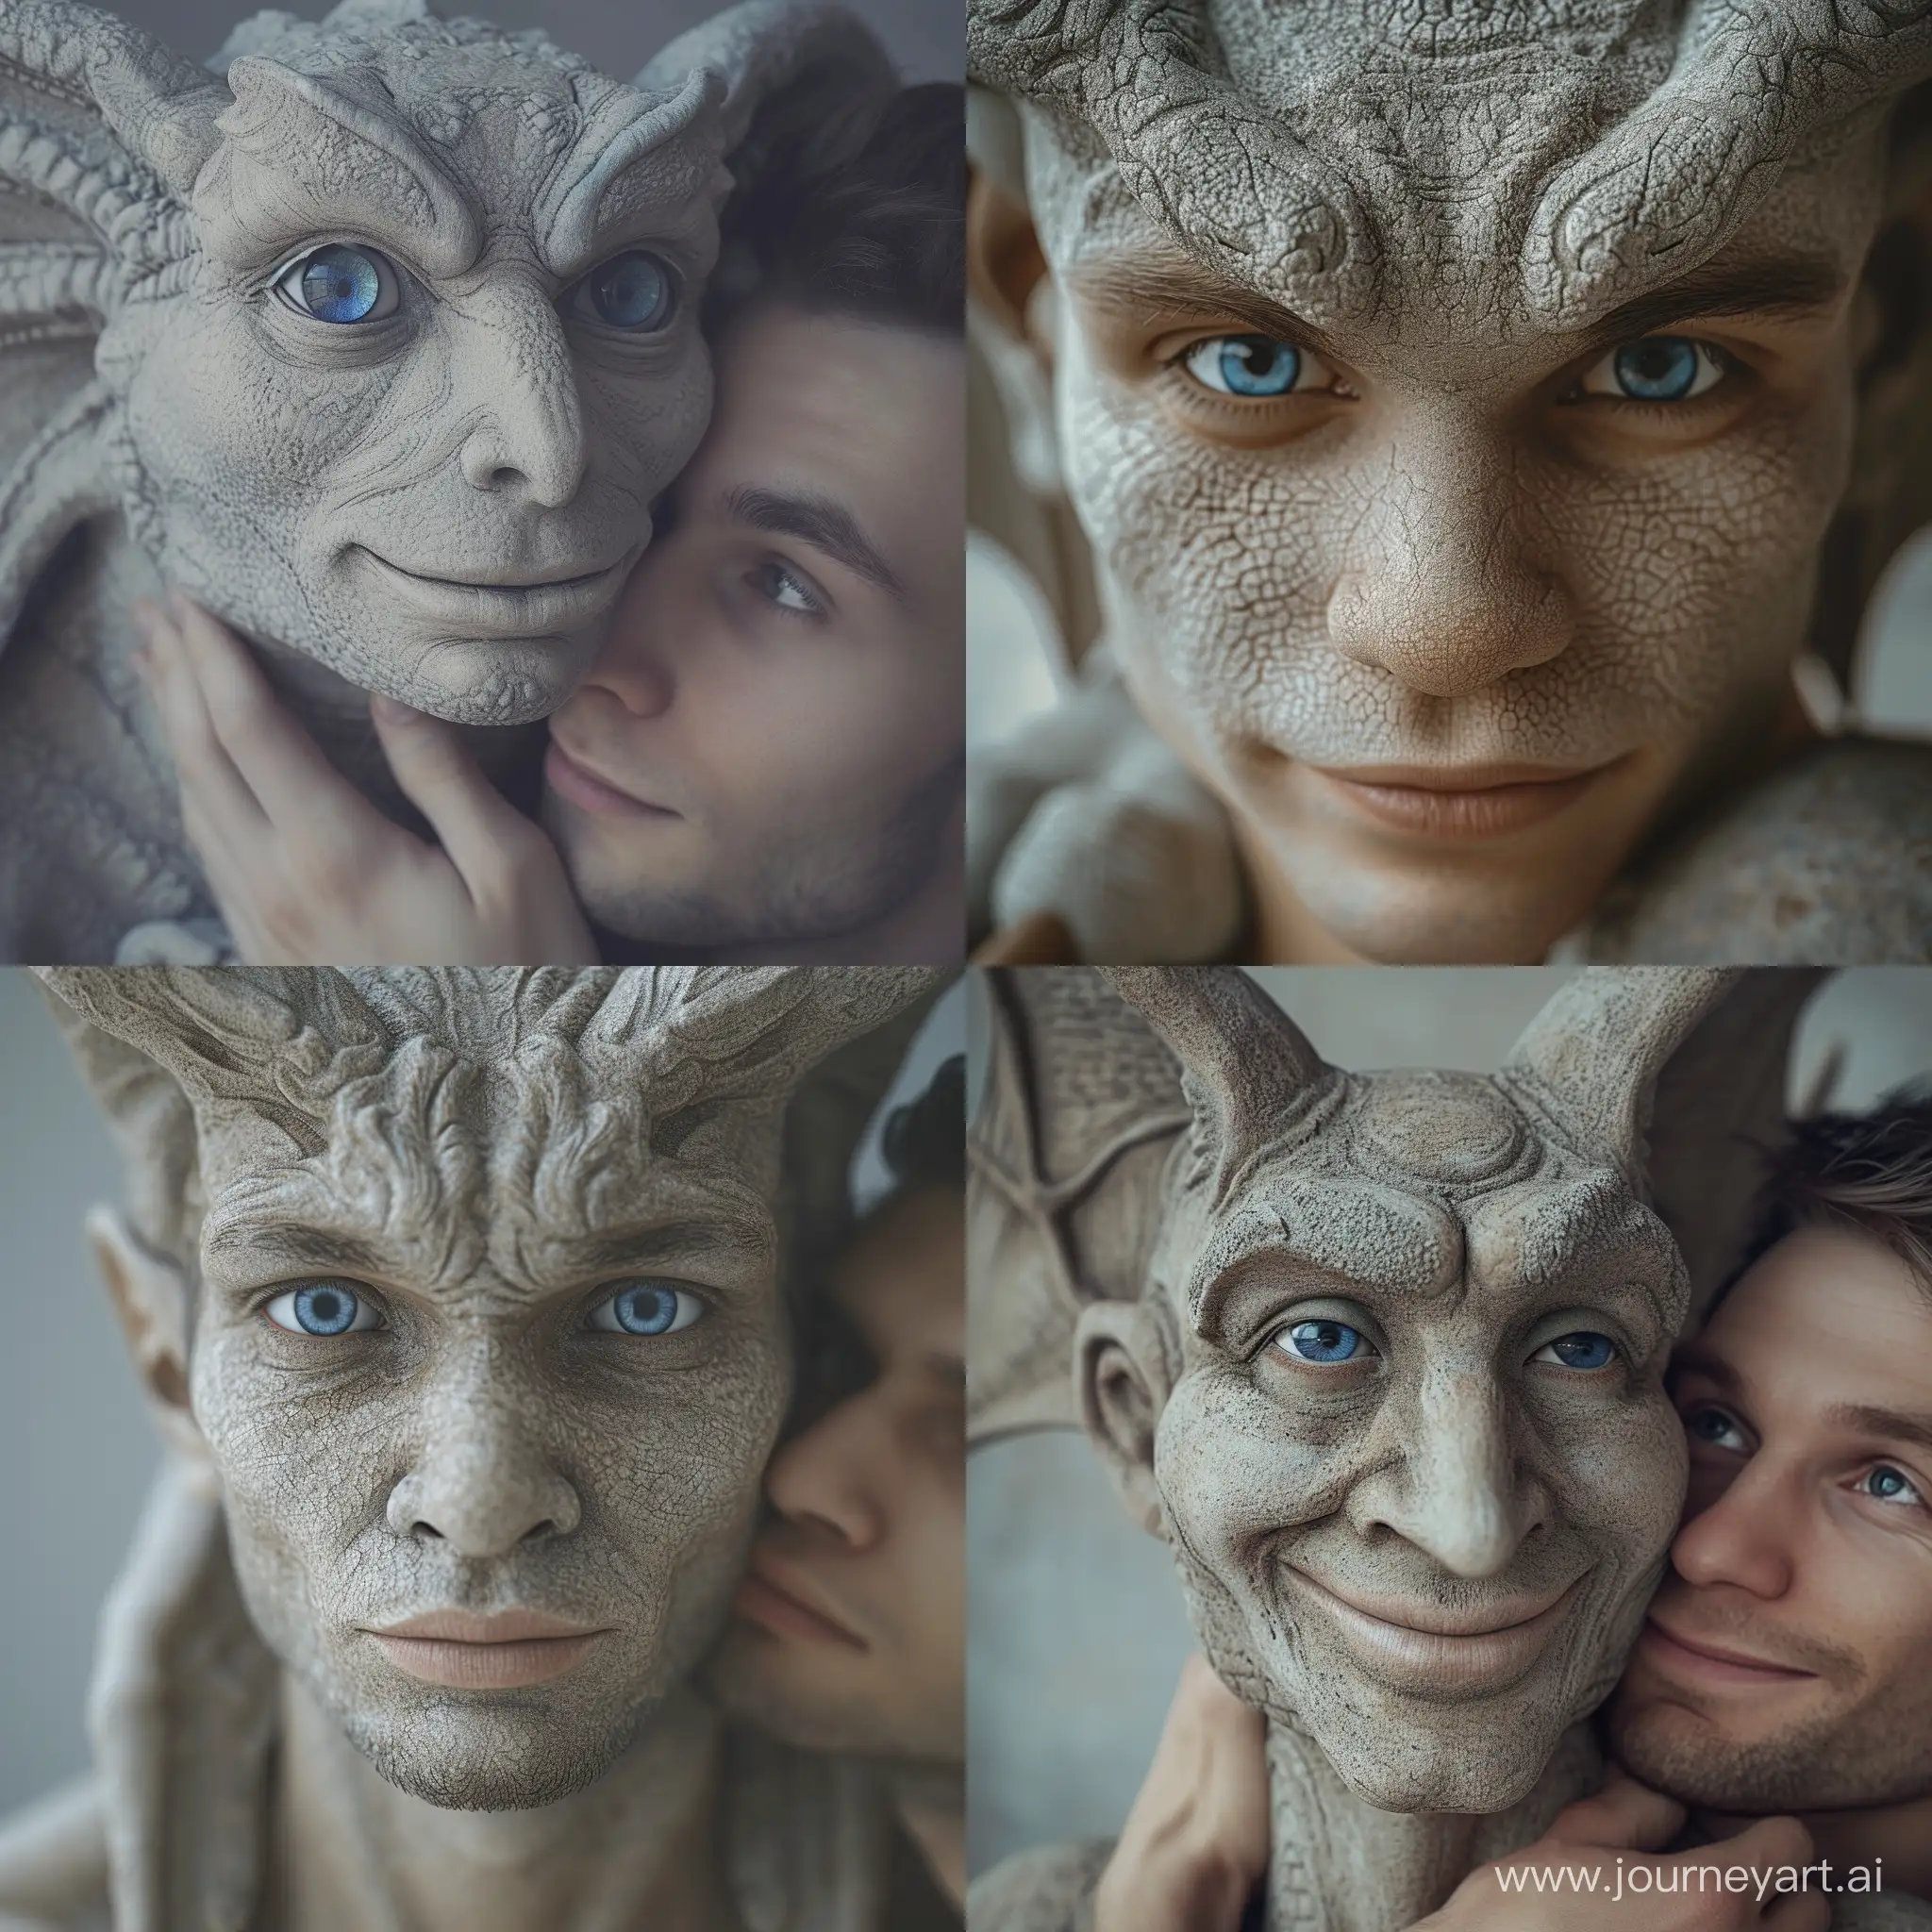 Enchanting-Love-HyperRealistic-Gargoyle-and-Man-Embrace-in-Surreal-Bliss